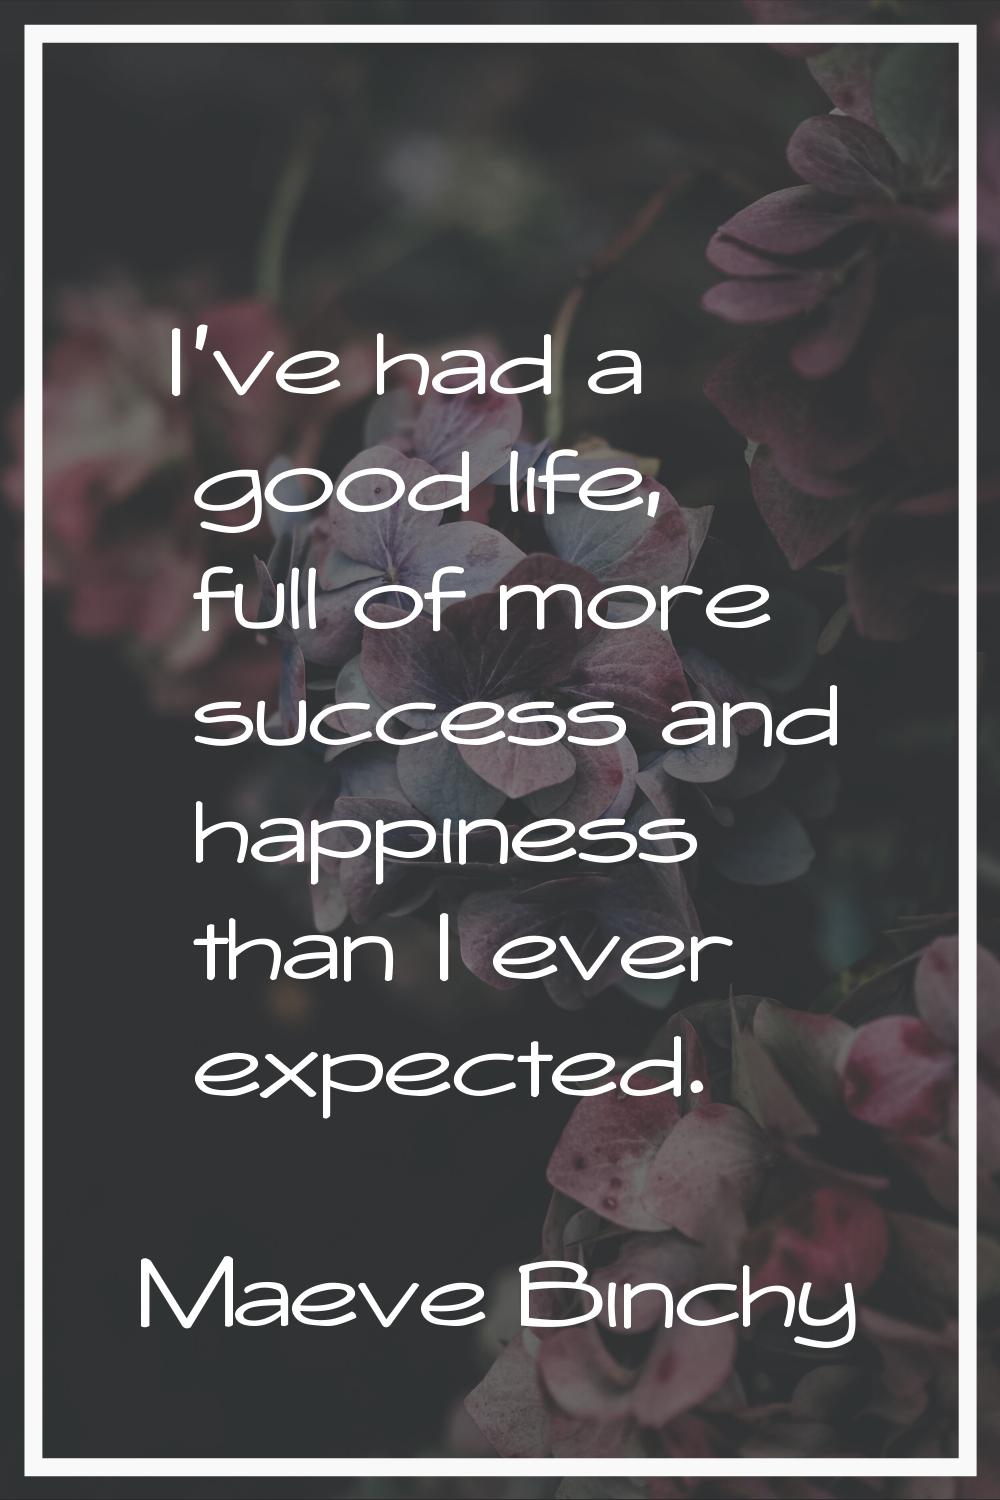 I've had a good life, full of more success and happiness than I ever expected.